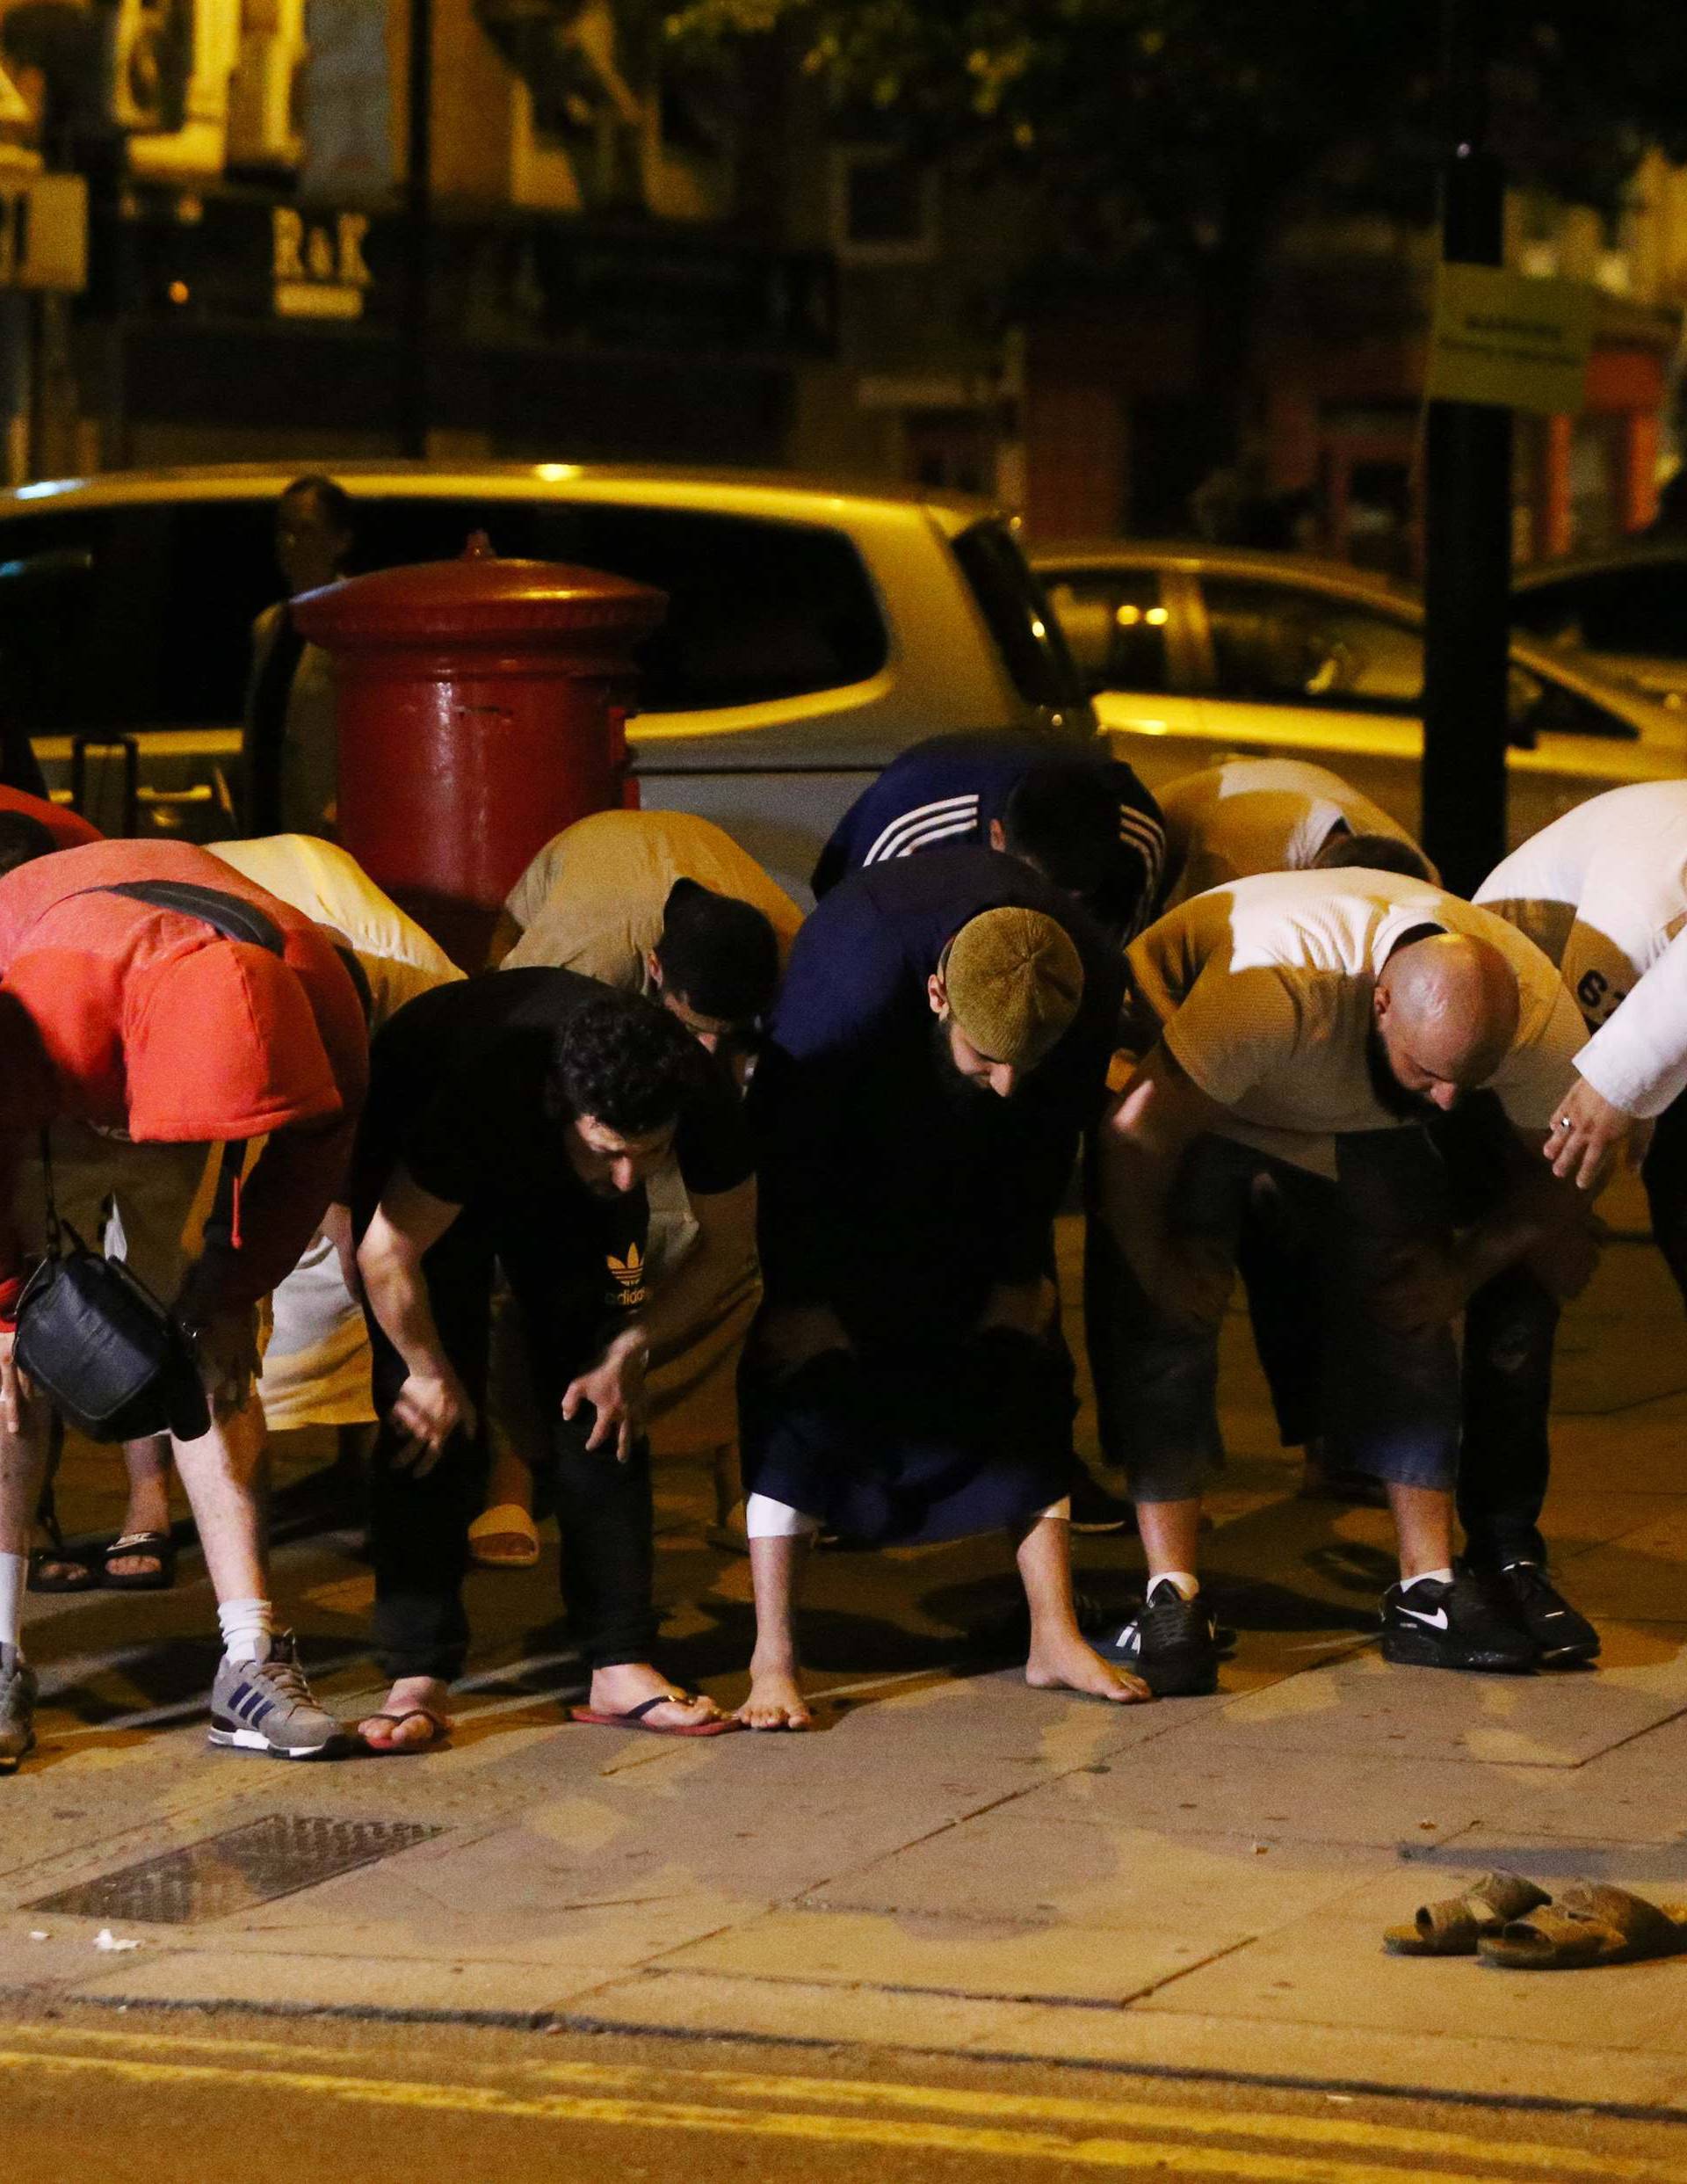 Men pray after a vehicle collided with pedestrians near a mosque in the Finsbury Park neighborhood of North London